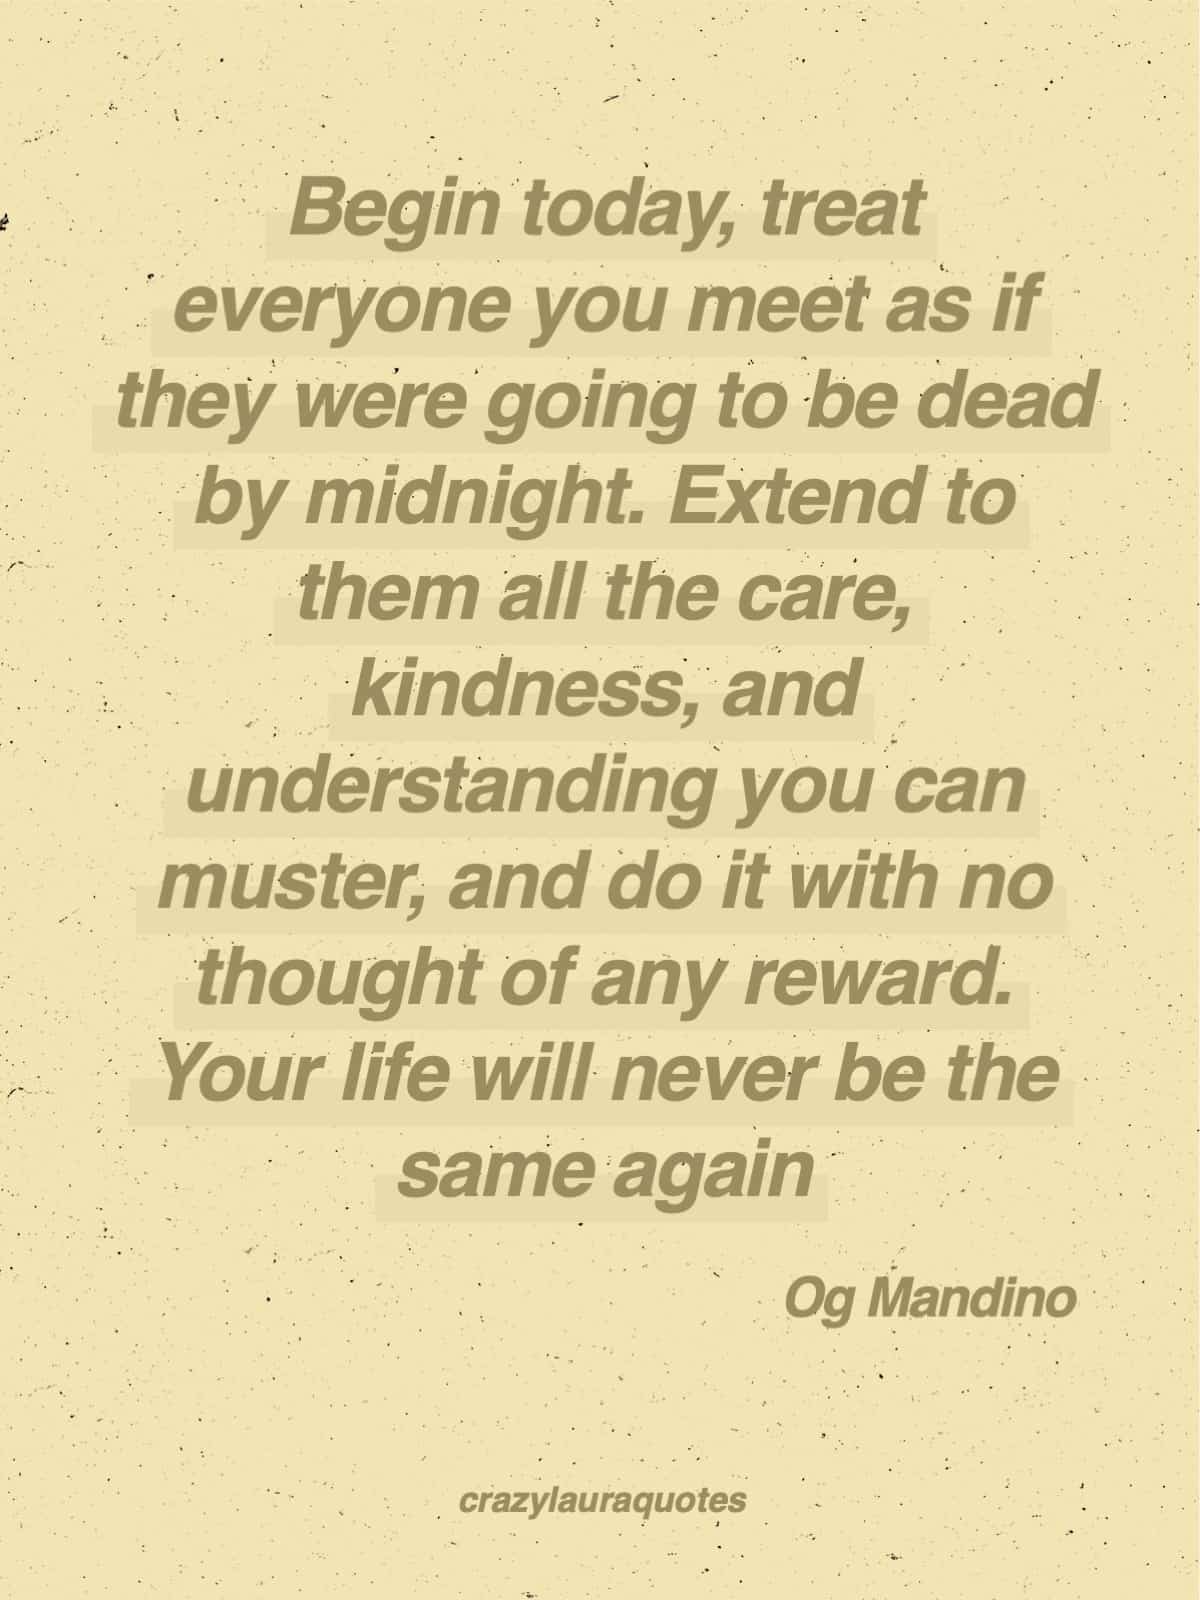 kind and understanding og mandino long quote